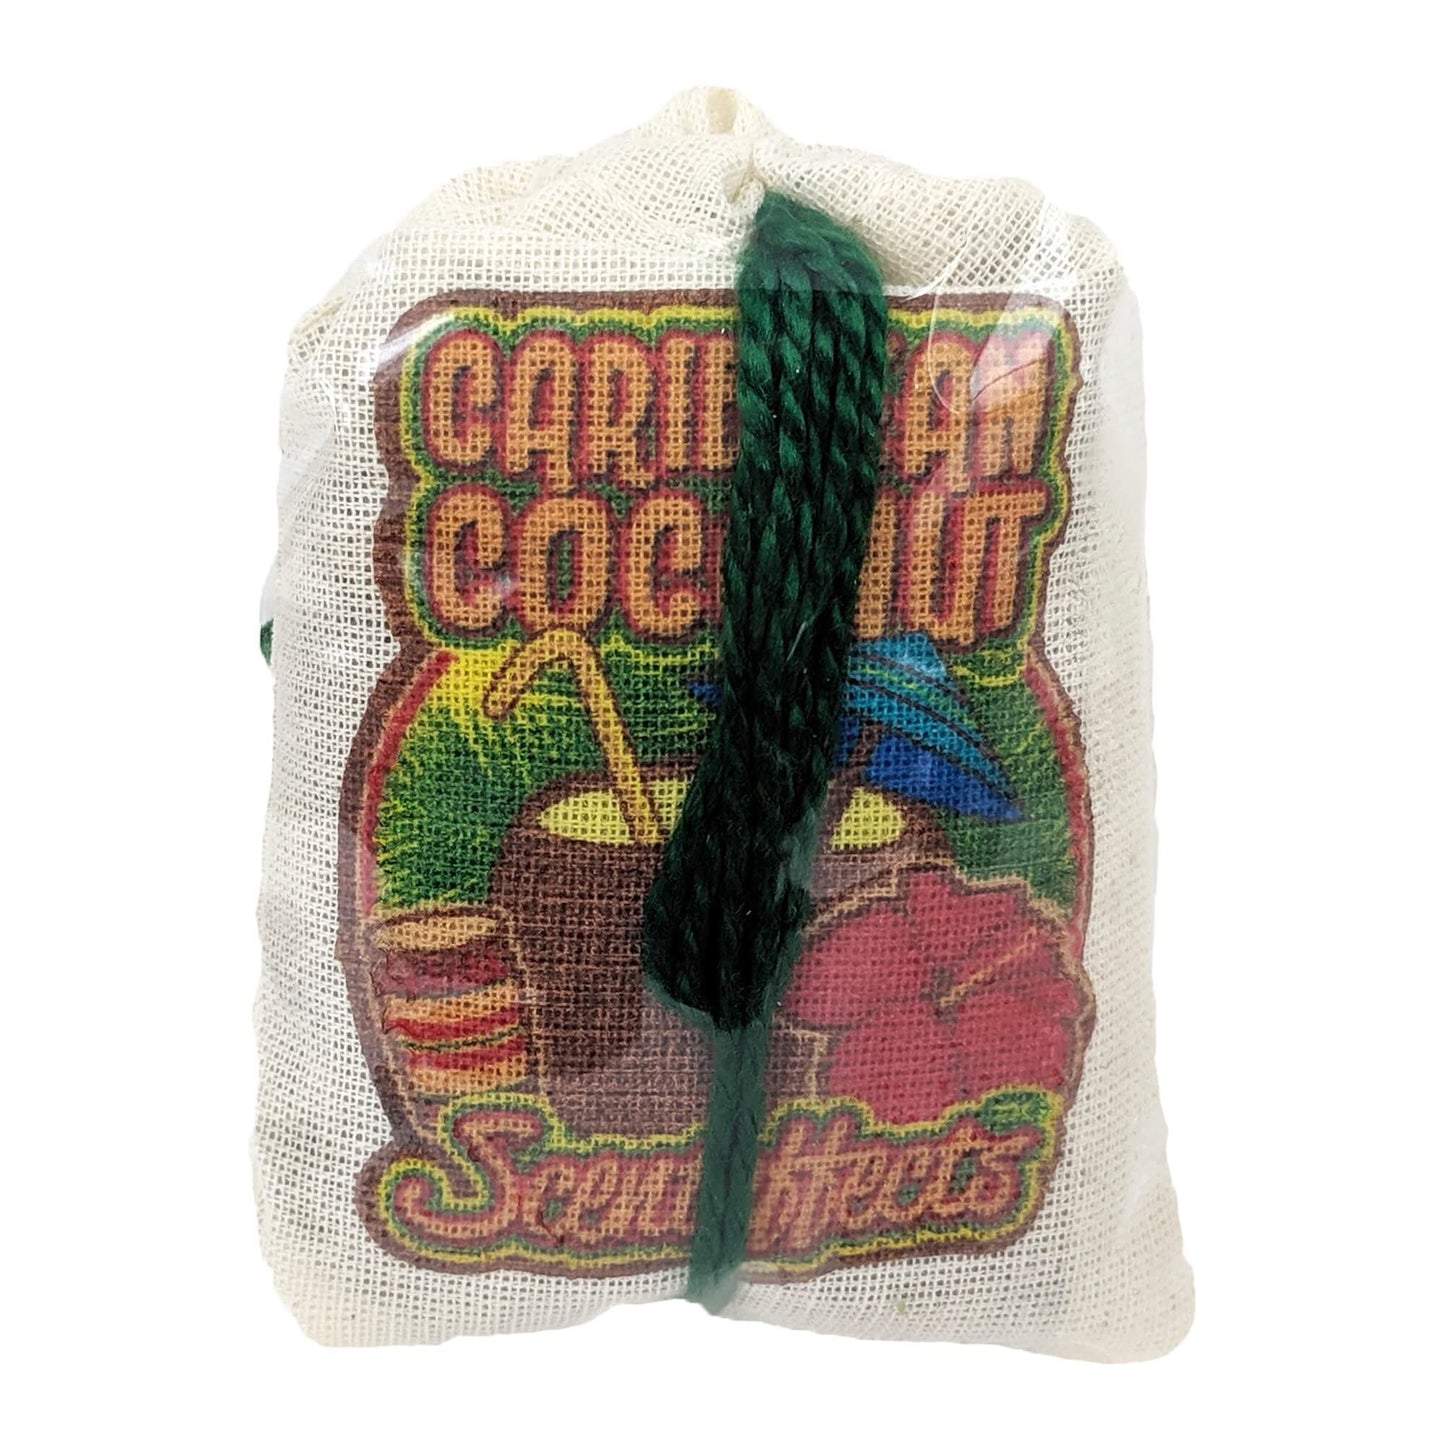 Scenteffects 3" Car Air Freshener Pouch, Caribbean Coconut Scent